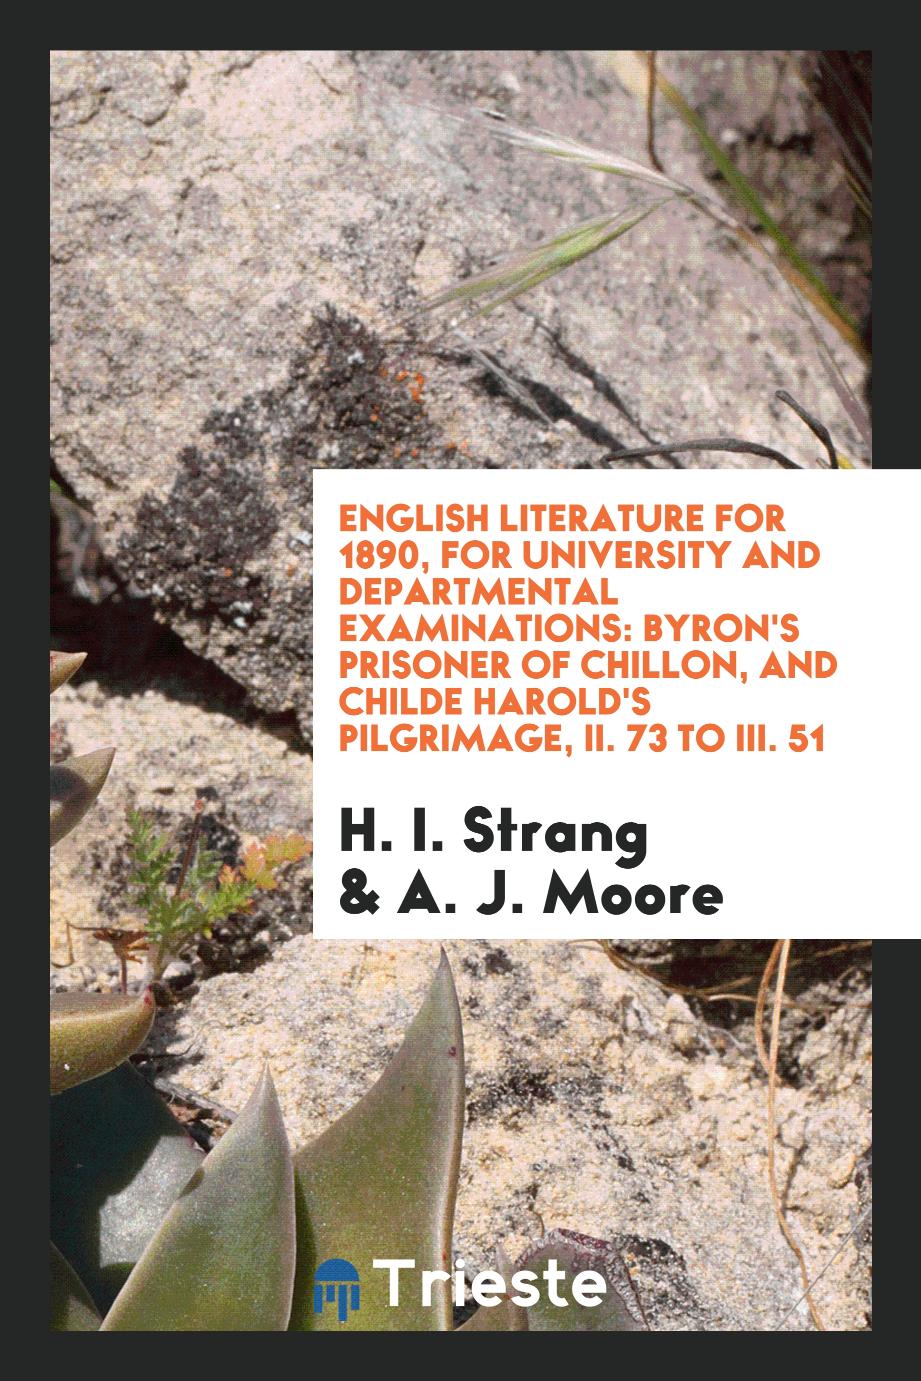 English literature for 1890, for university and departmental examinations: Byron's Prisoner of Chillon, and Childe Harold's Pilgrimage, II. 73 to III. 51